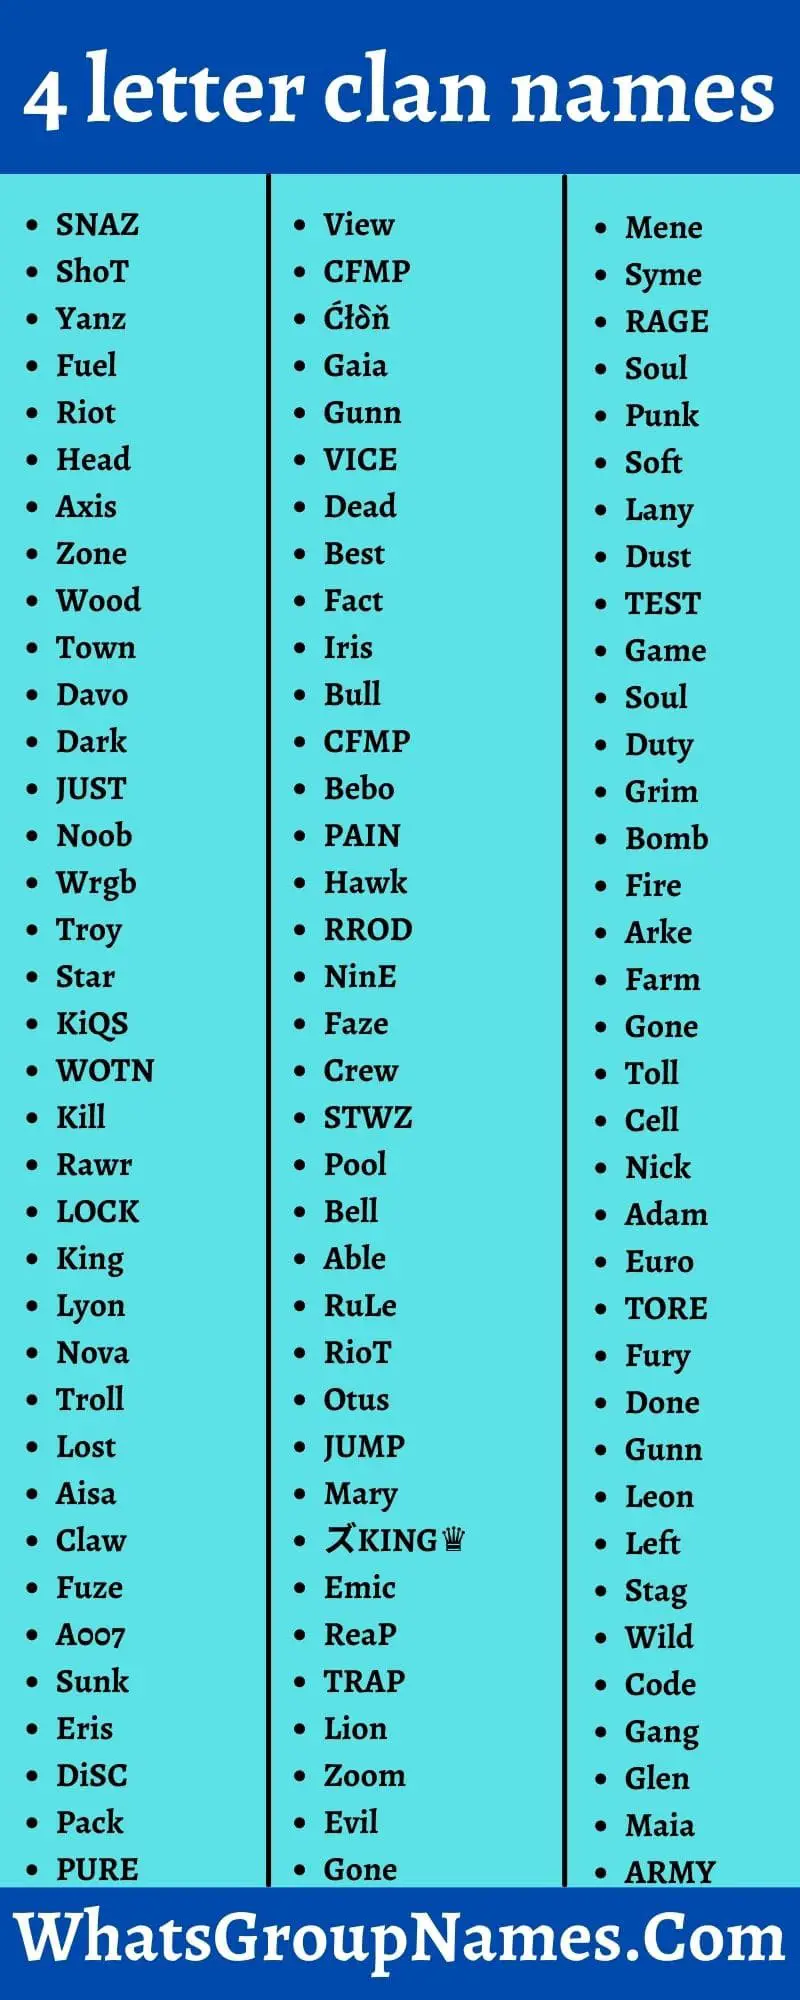 4 letter clan names